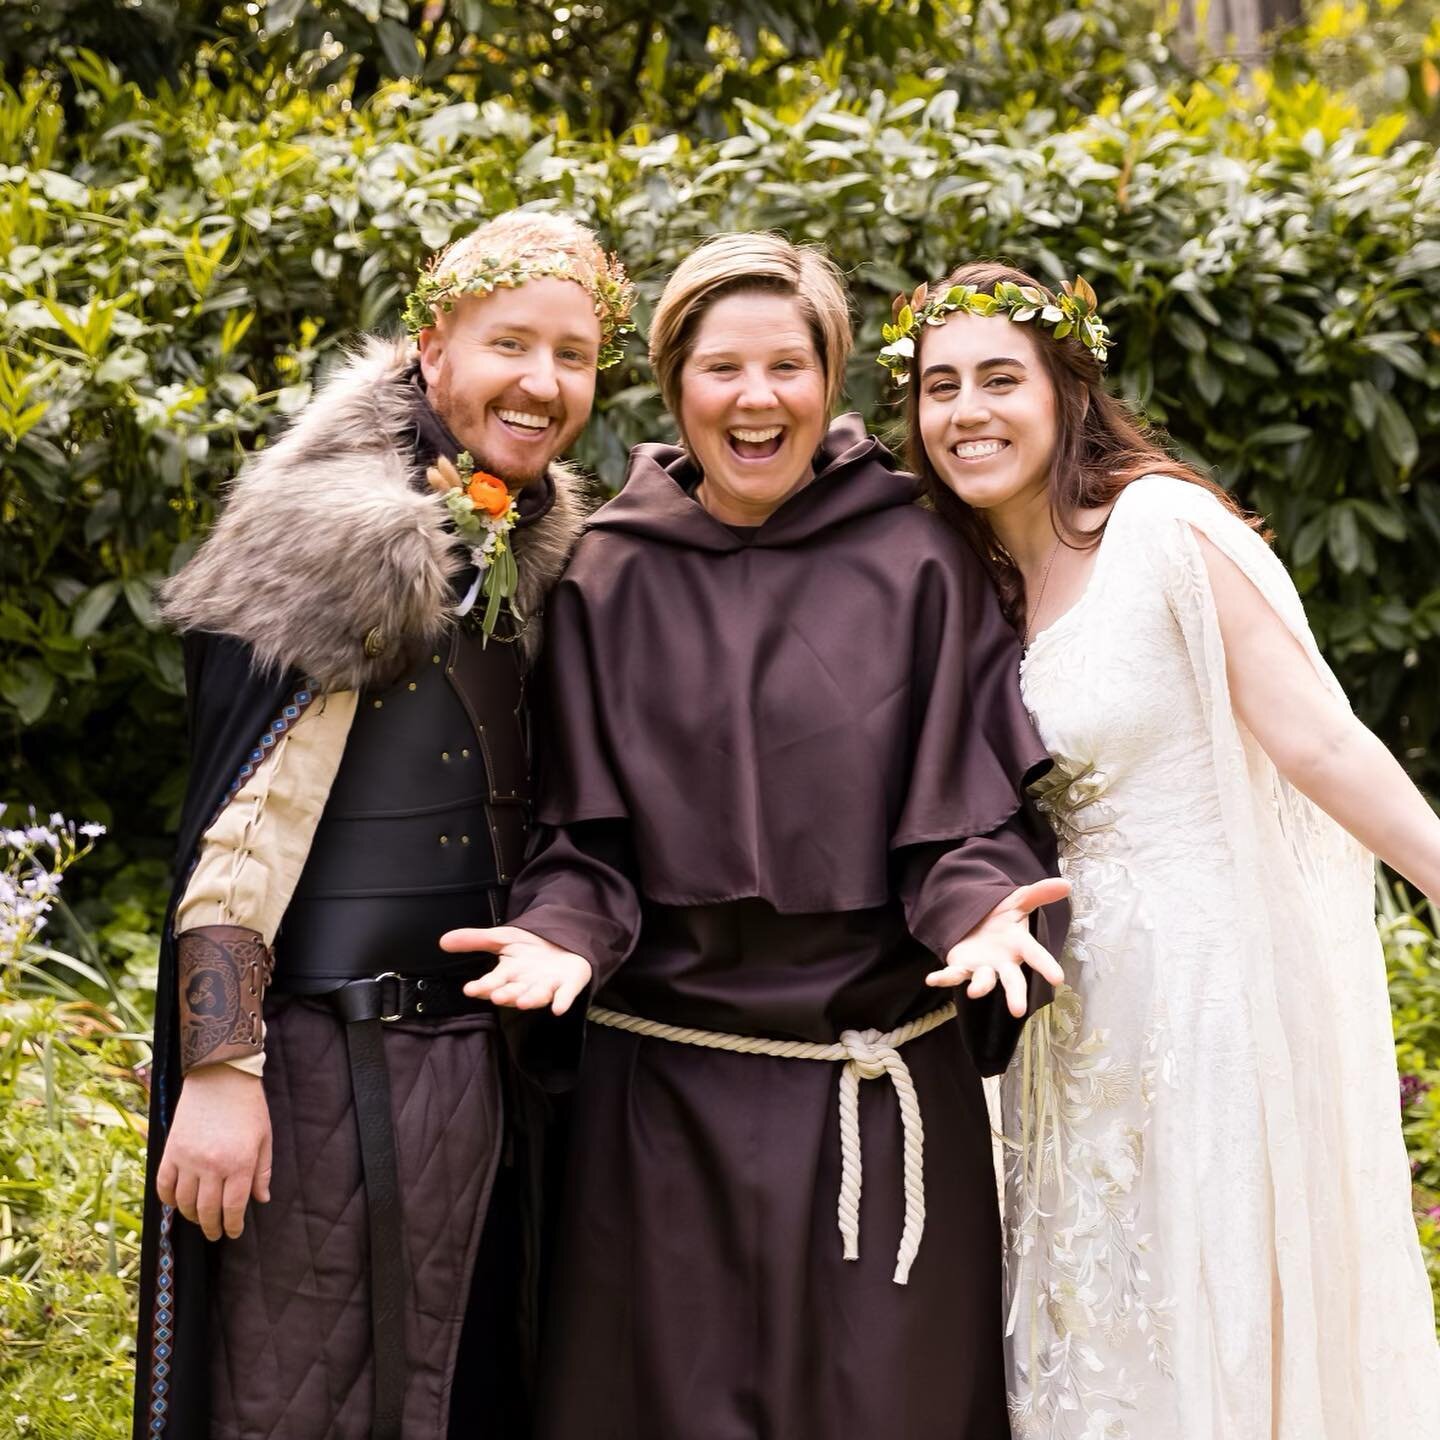 I&rsquo;ve had a lot of really unique experiences as a wedding officiant, but dressing up as a monk for Nate &amp; Natalya&rsquo;s Shakespeare inspired wedding was definitely one of the most unique and most memorable.

So many details went into makin